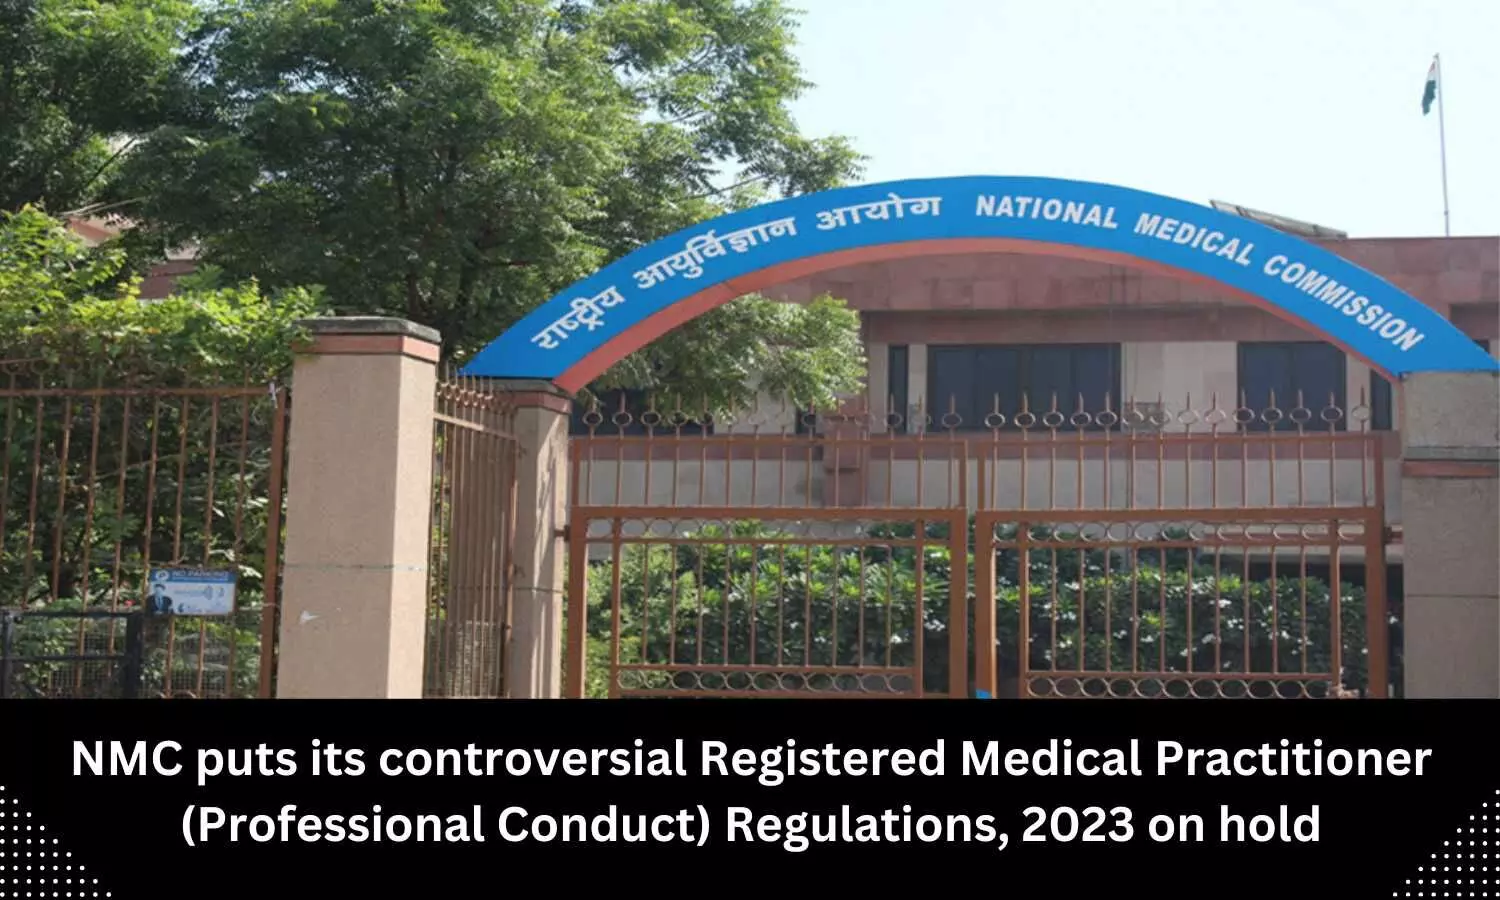 NMC puts on hold its controversial Registered Medical Practitioner Regulations, 2023